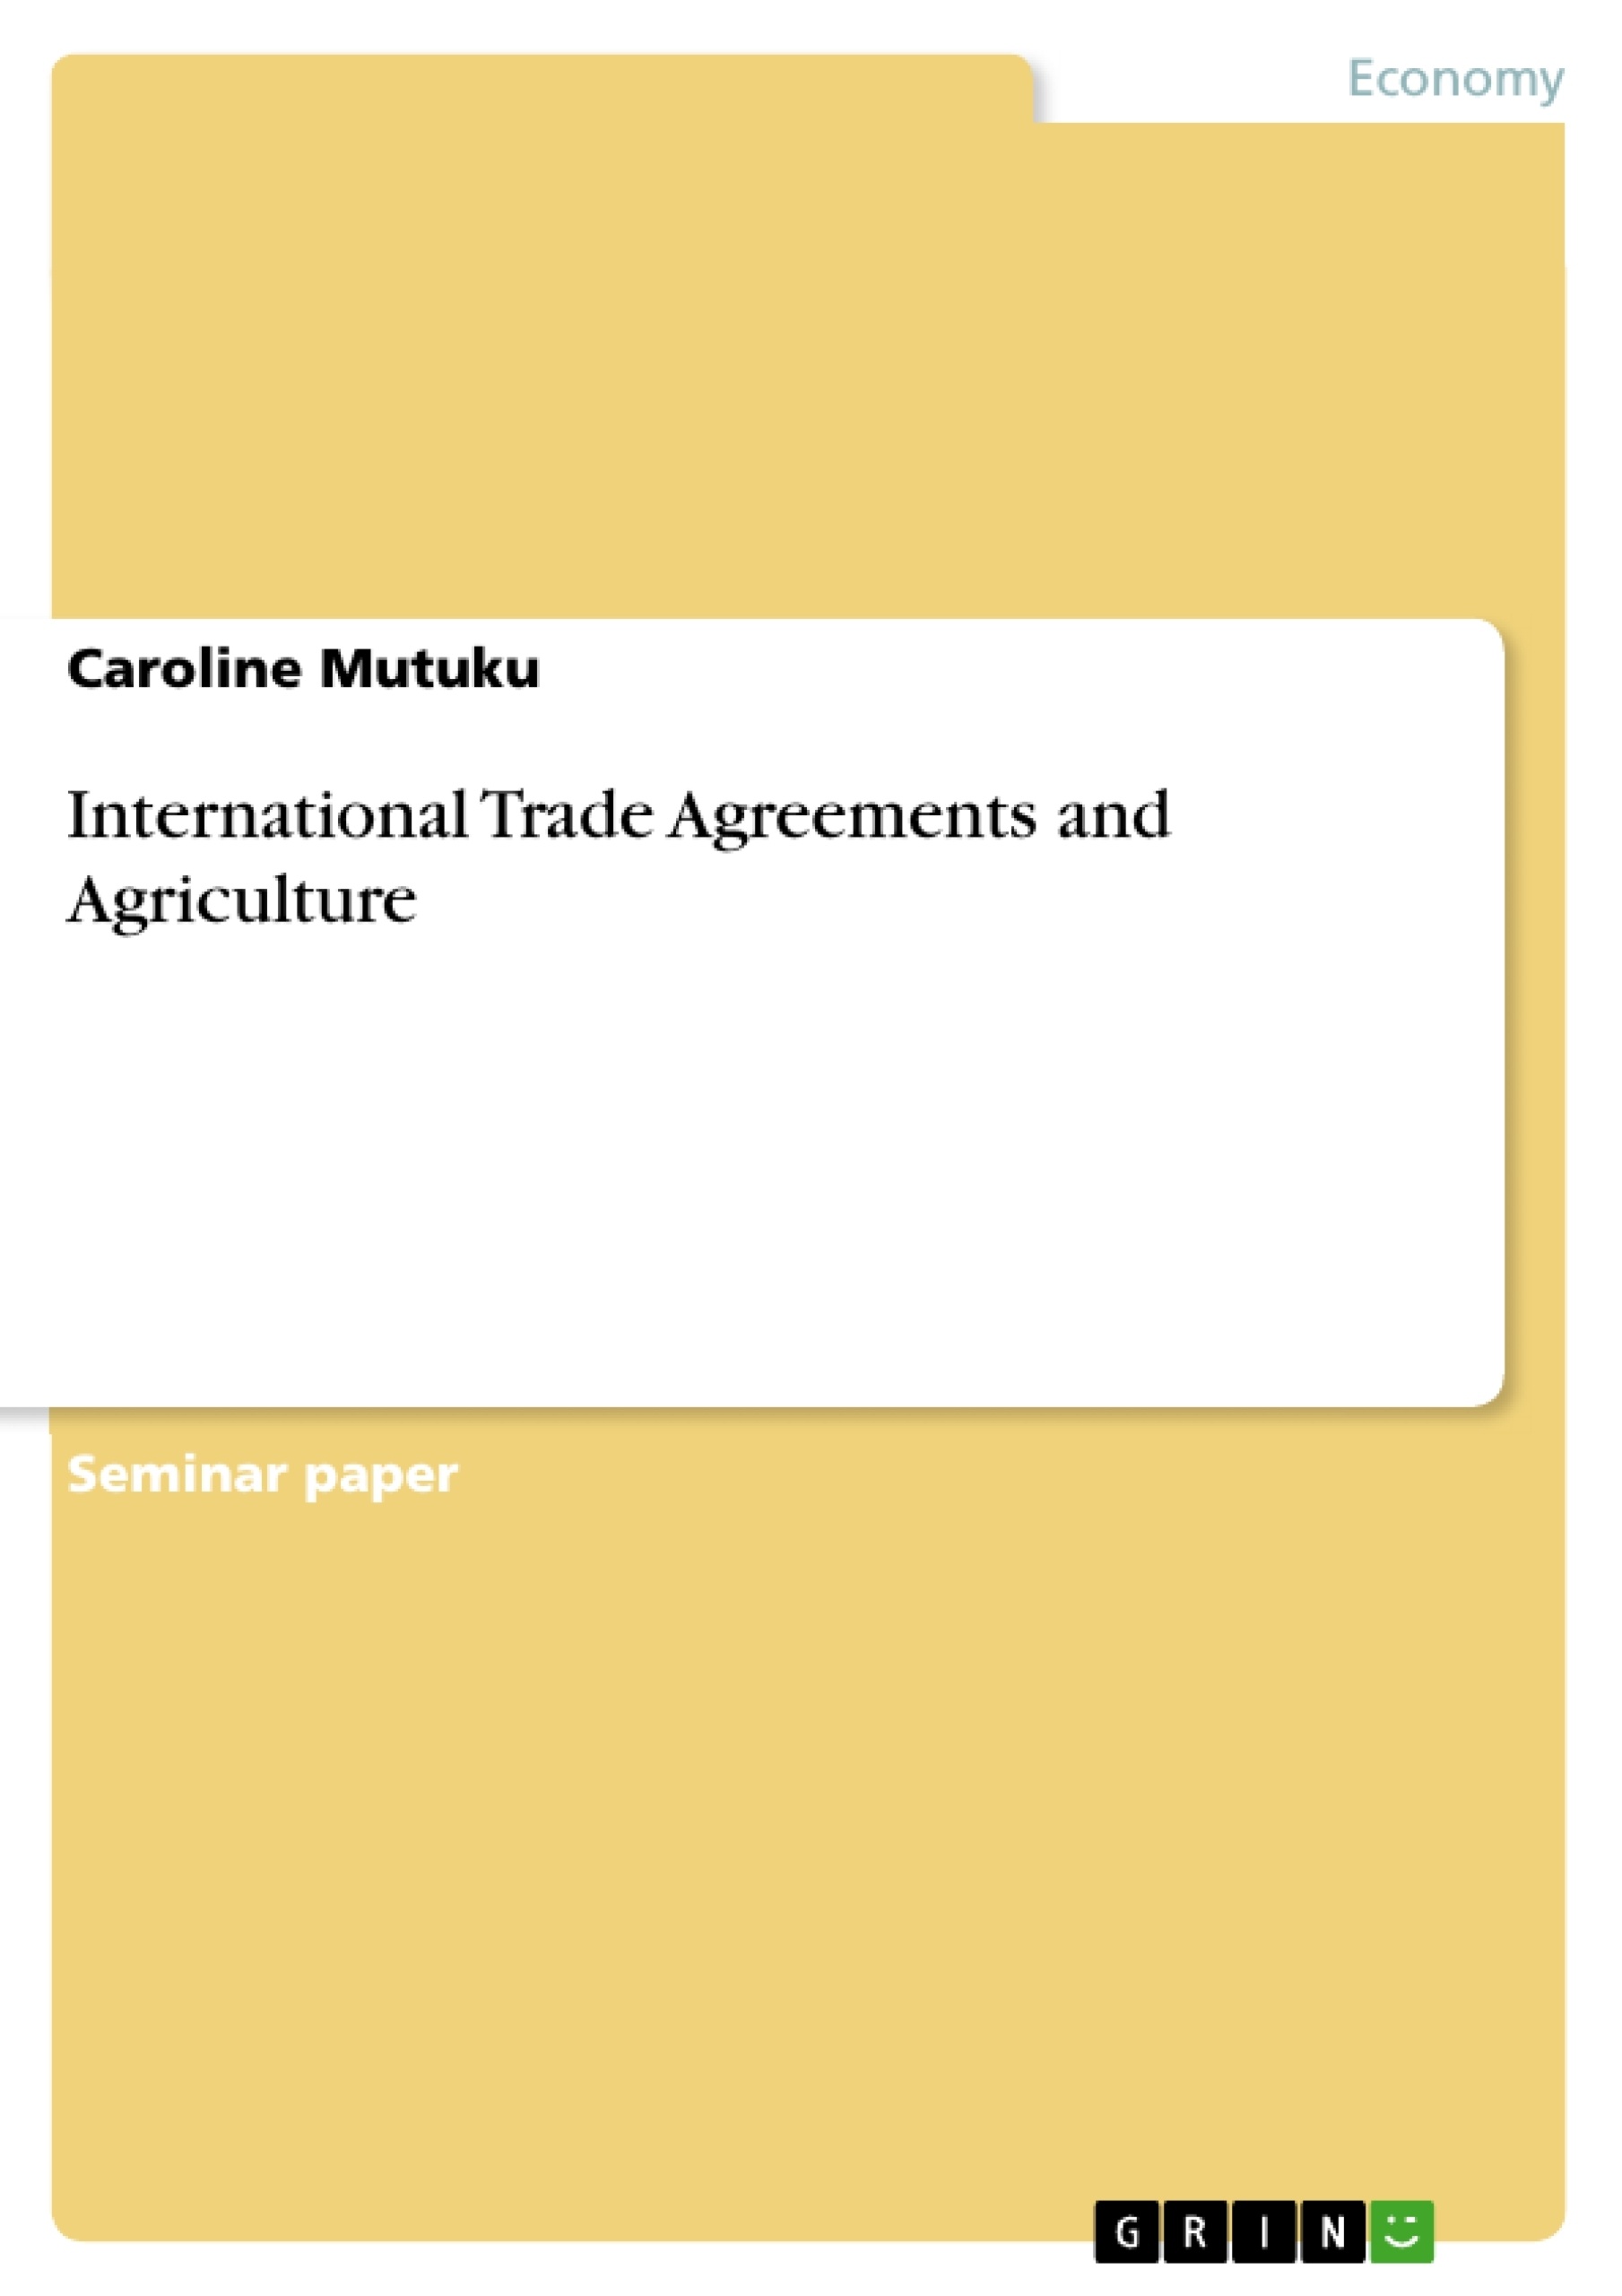 Title: International Trade Agreements and Agriculture